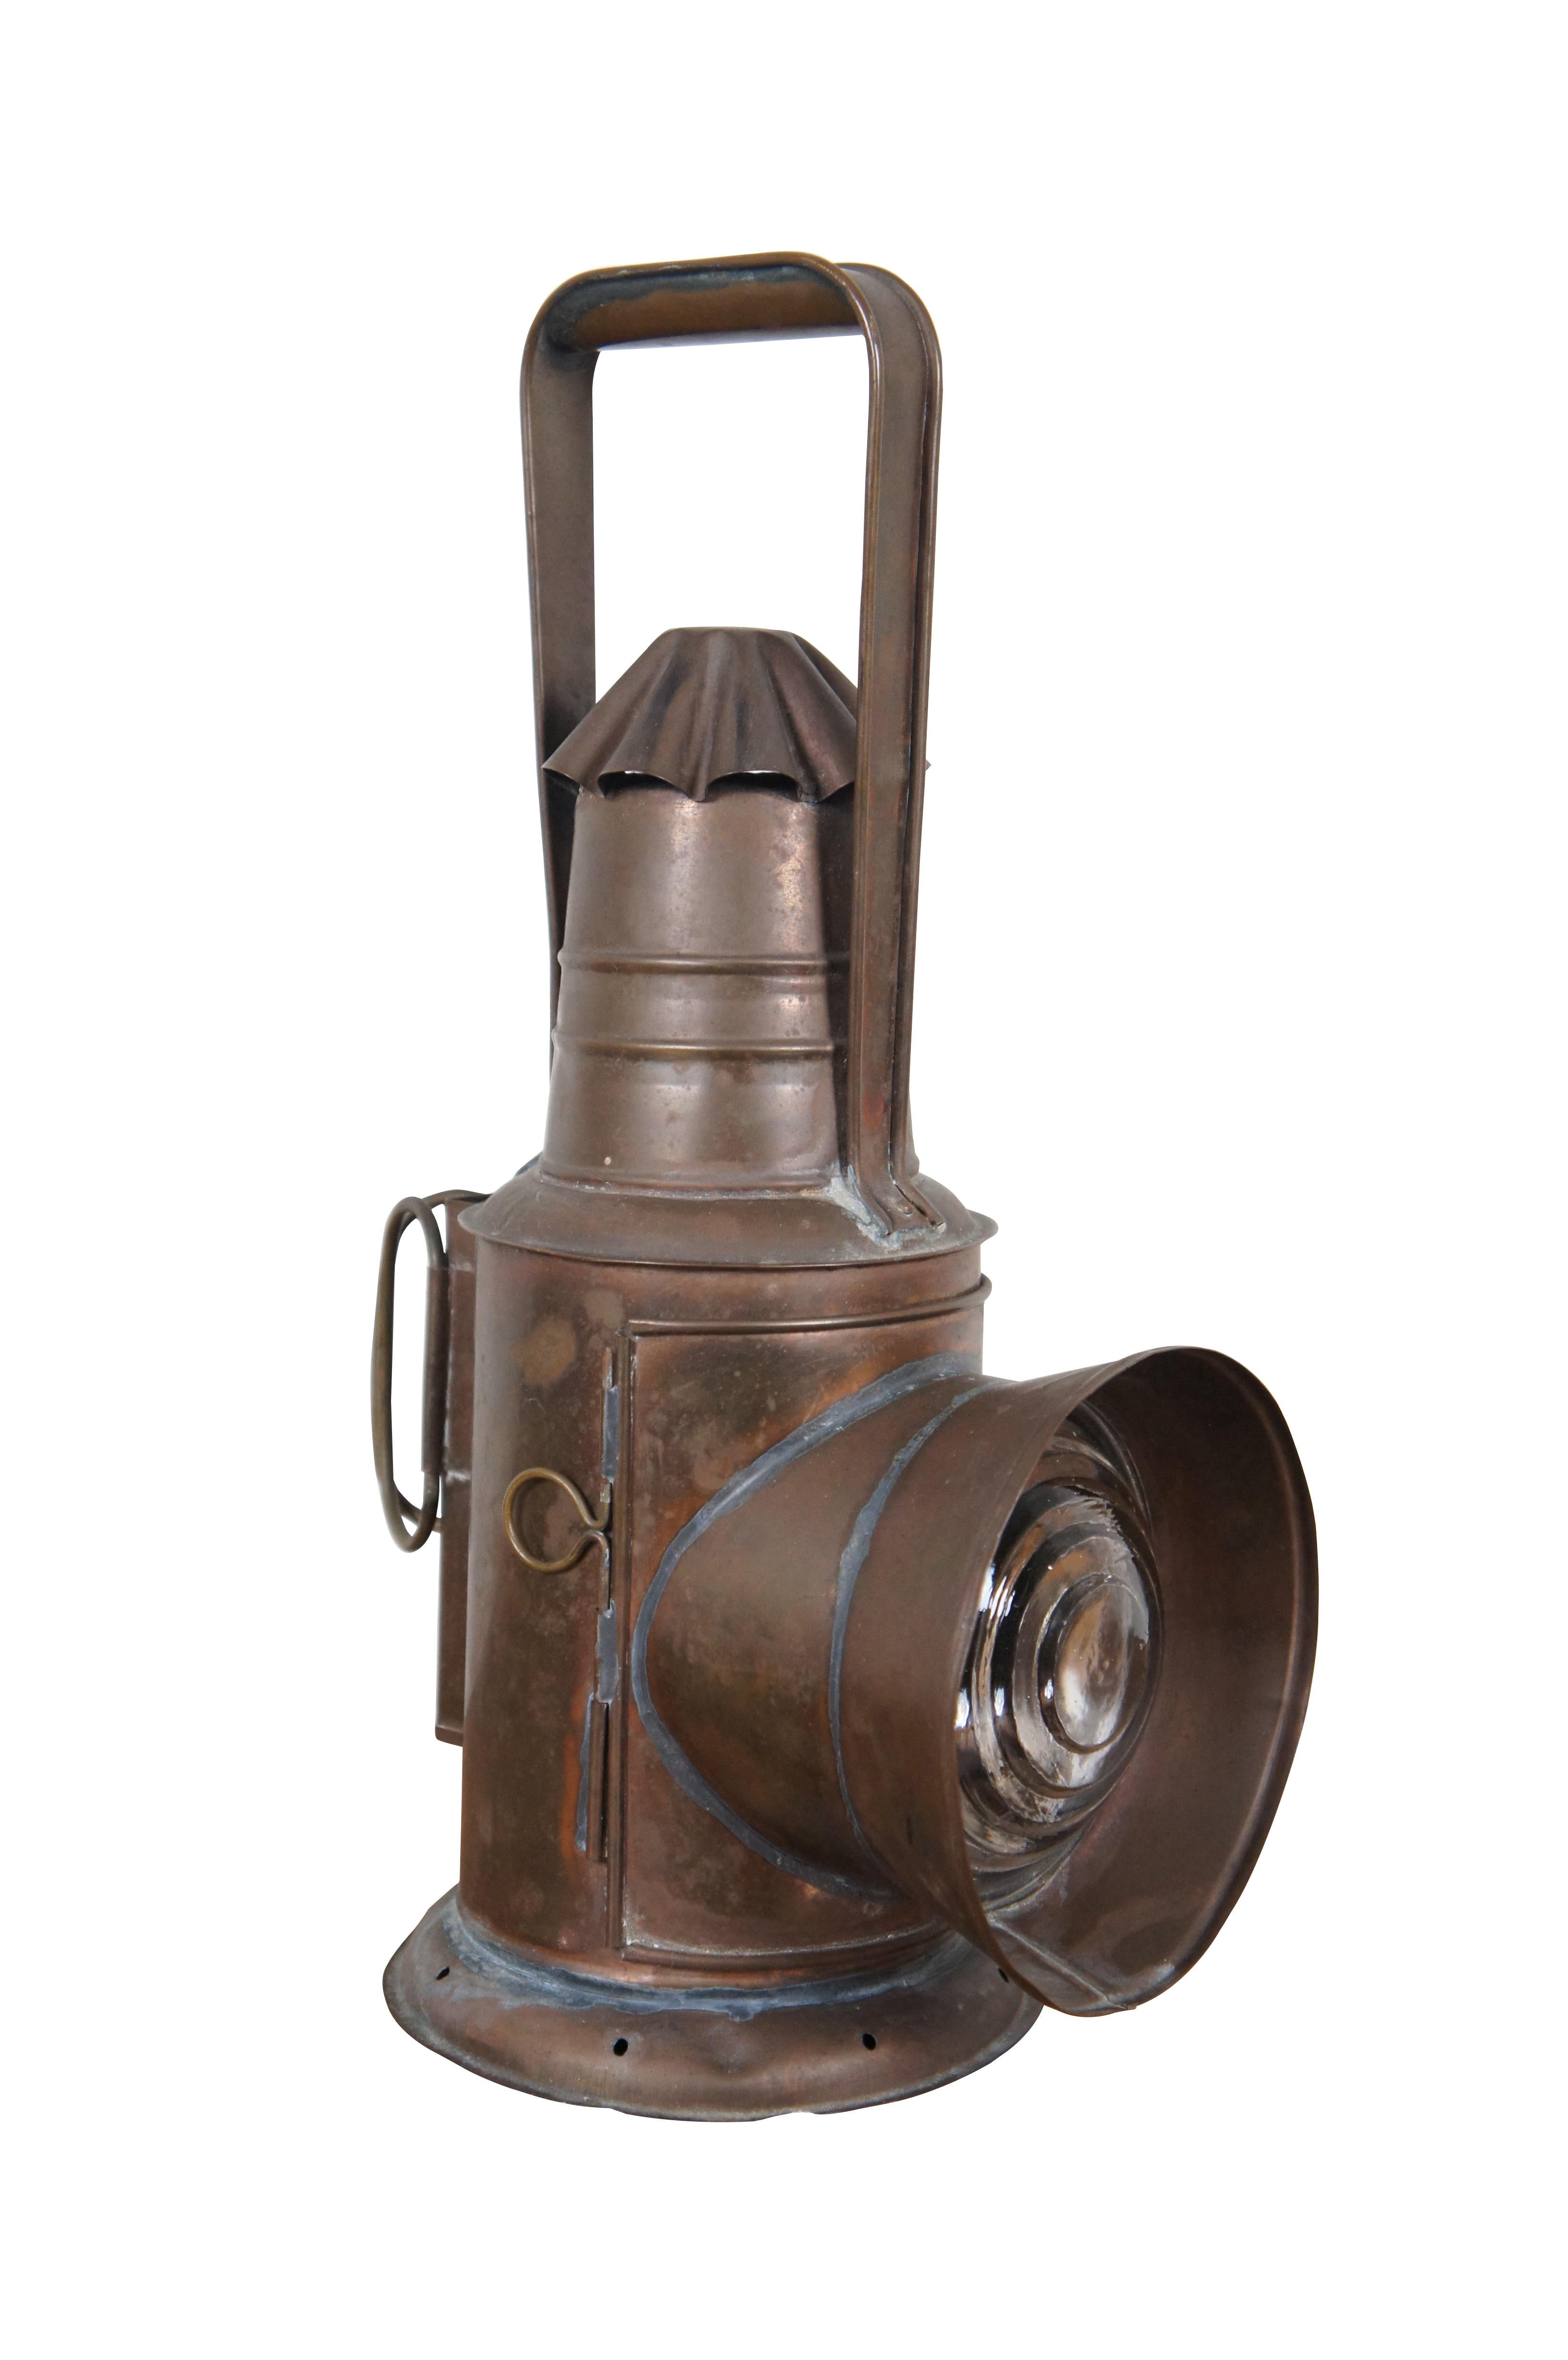 Antique copper police/ railroad / boat signal lantern / hand lamp. Features cylindrical body style, fluted cone shaped chimney top, and rear handles of a typical dark lantern but no internal shutter for hiding the light. Fixed rectangular bail